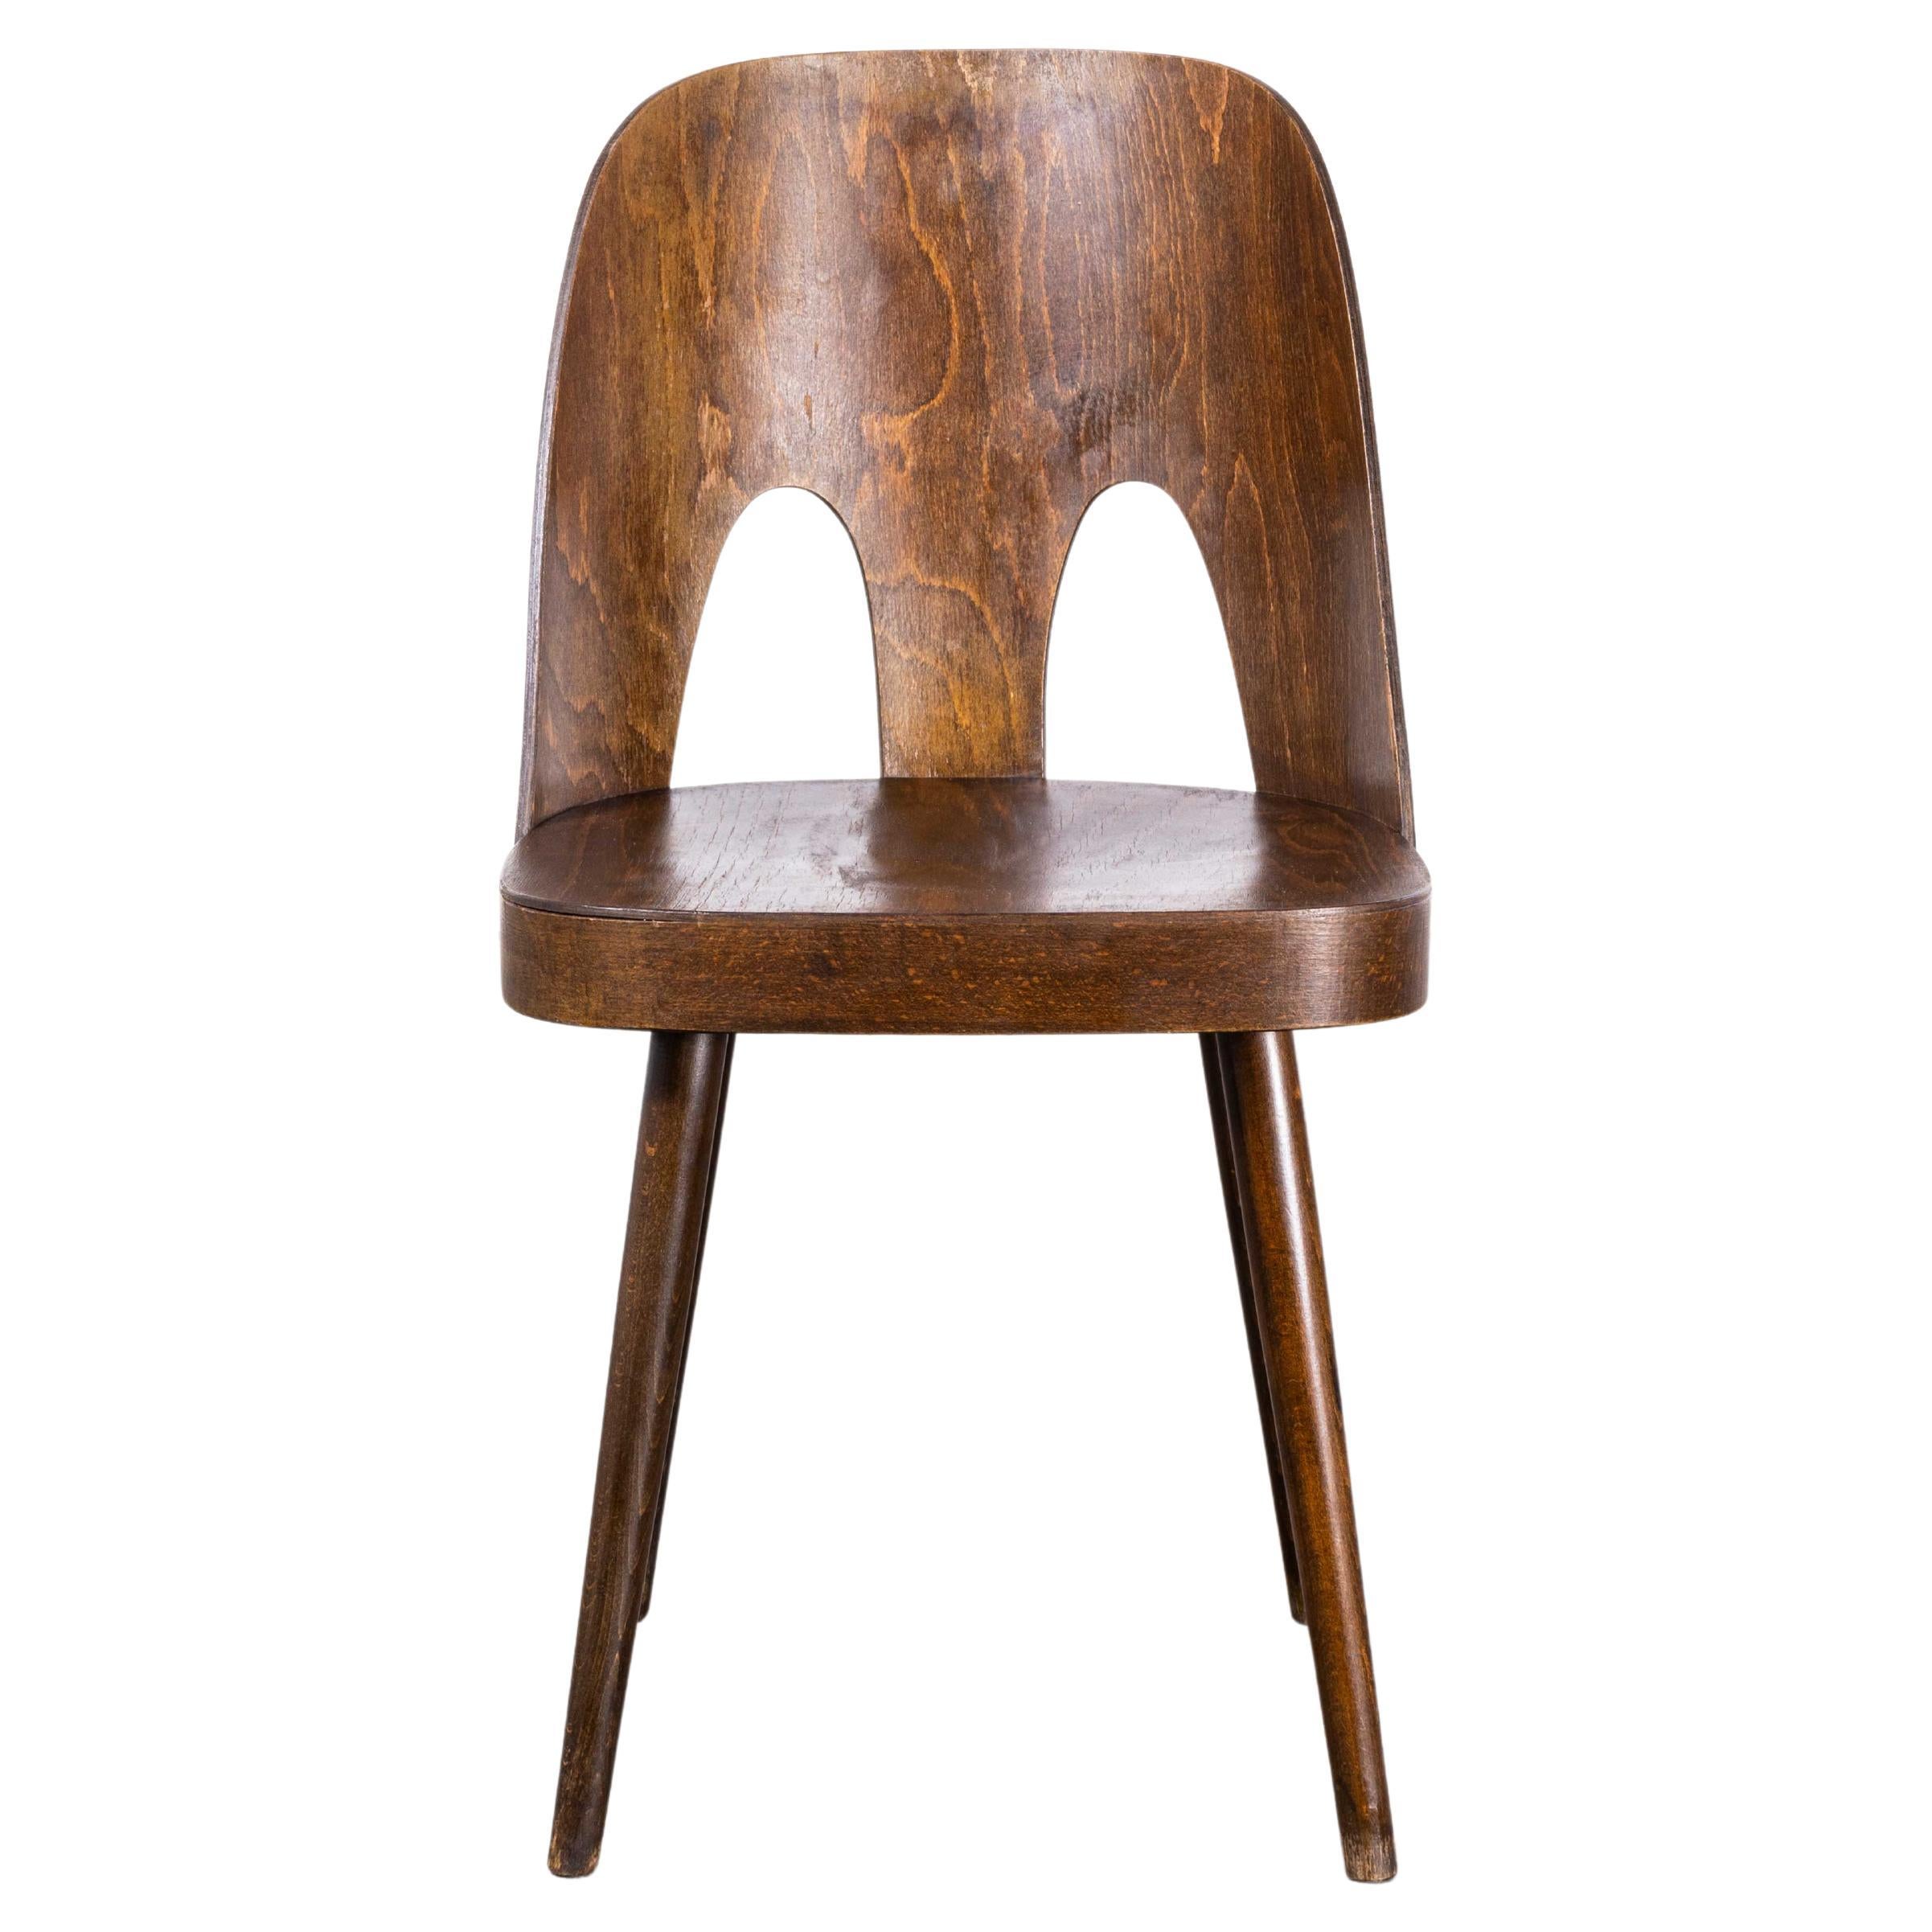 1960's Dark Oak Dining Chair by Antonin Suman For Ton - Double Vent For Sale